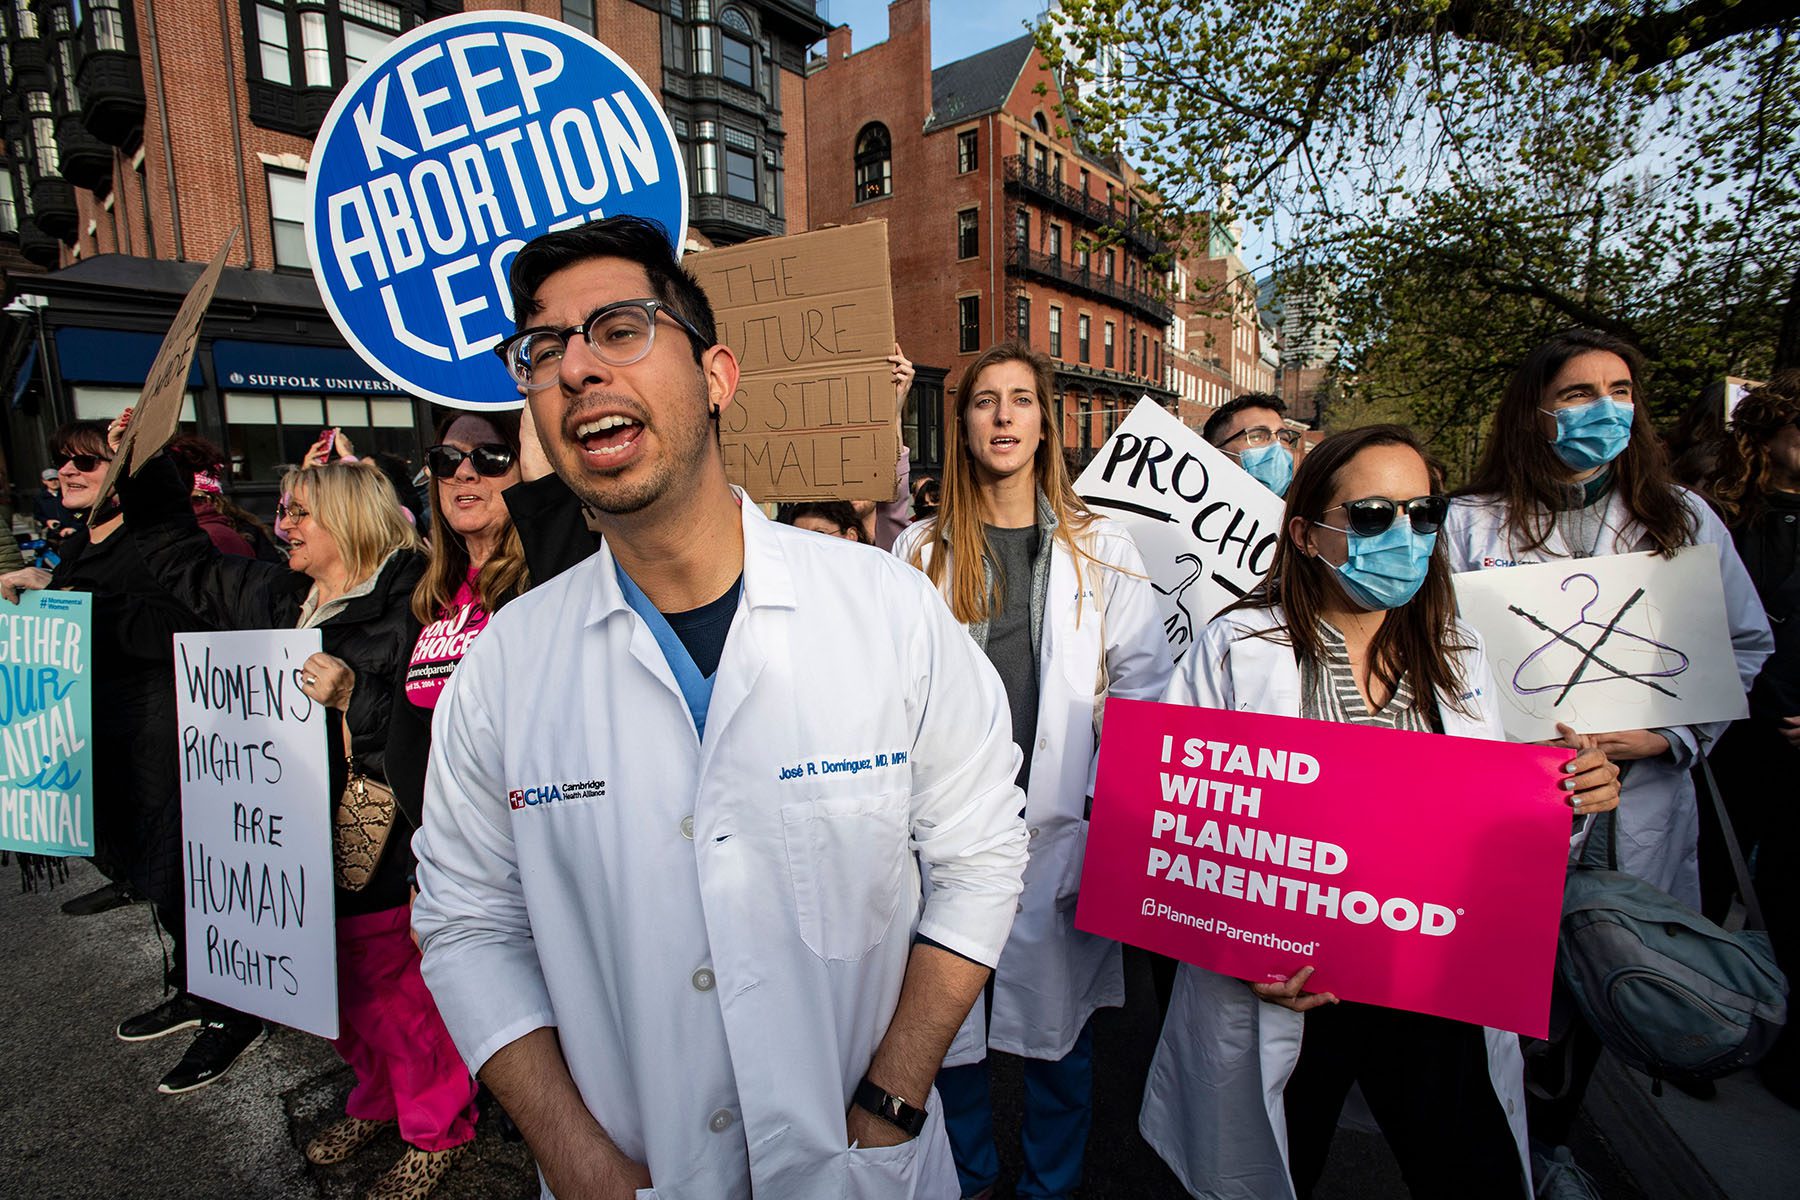 A group of doctors and medical workers join protesters. They hold signs that read "I stand with planned parenthood," "keep abortion legal," and "women's rights are human rights."